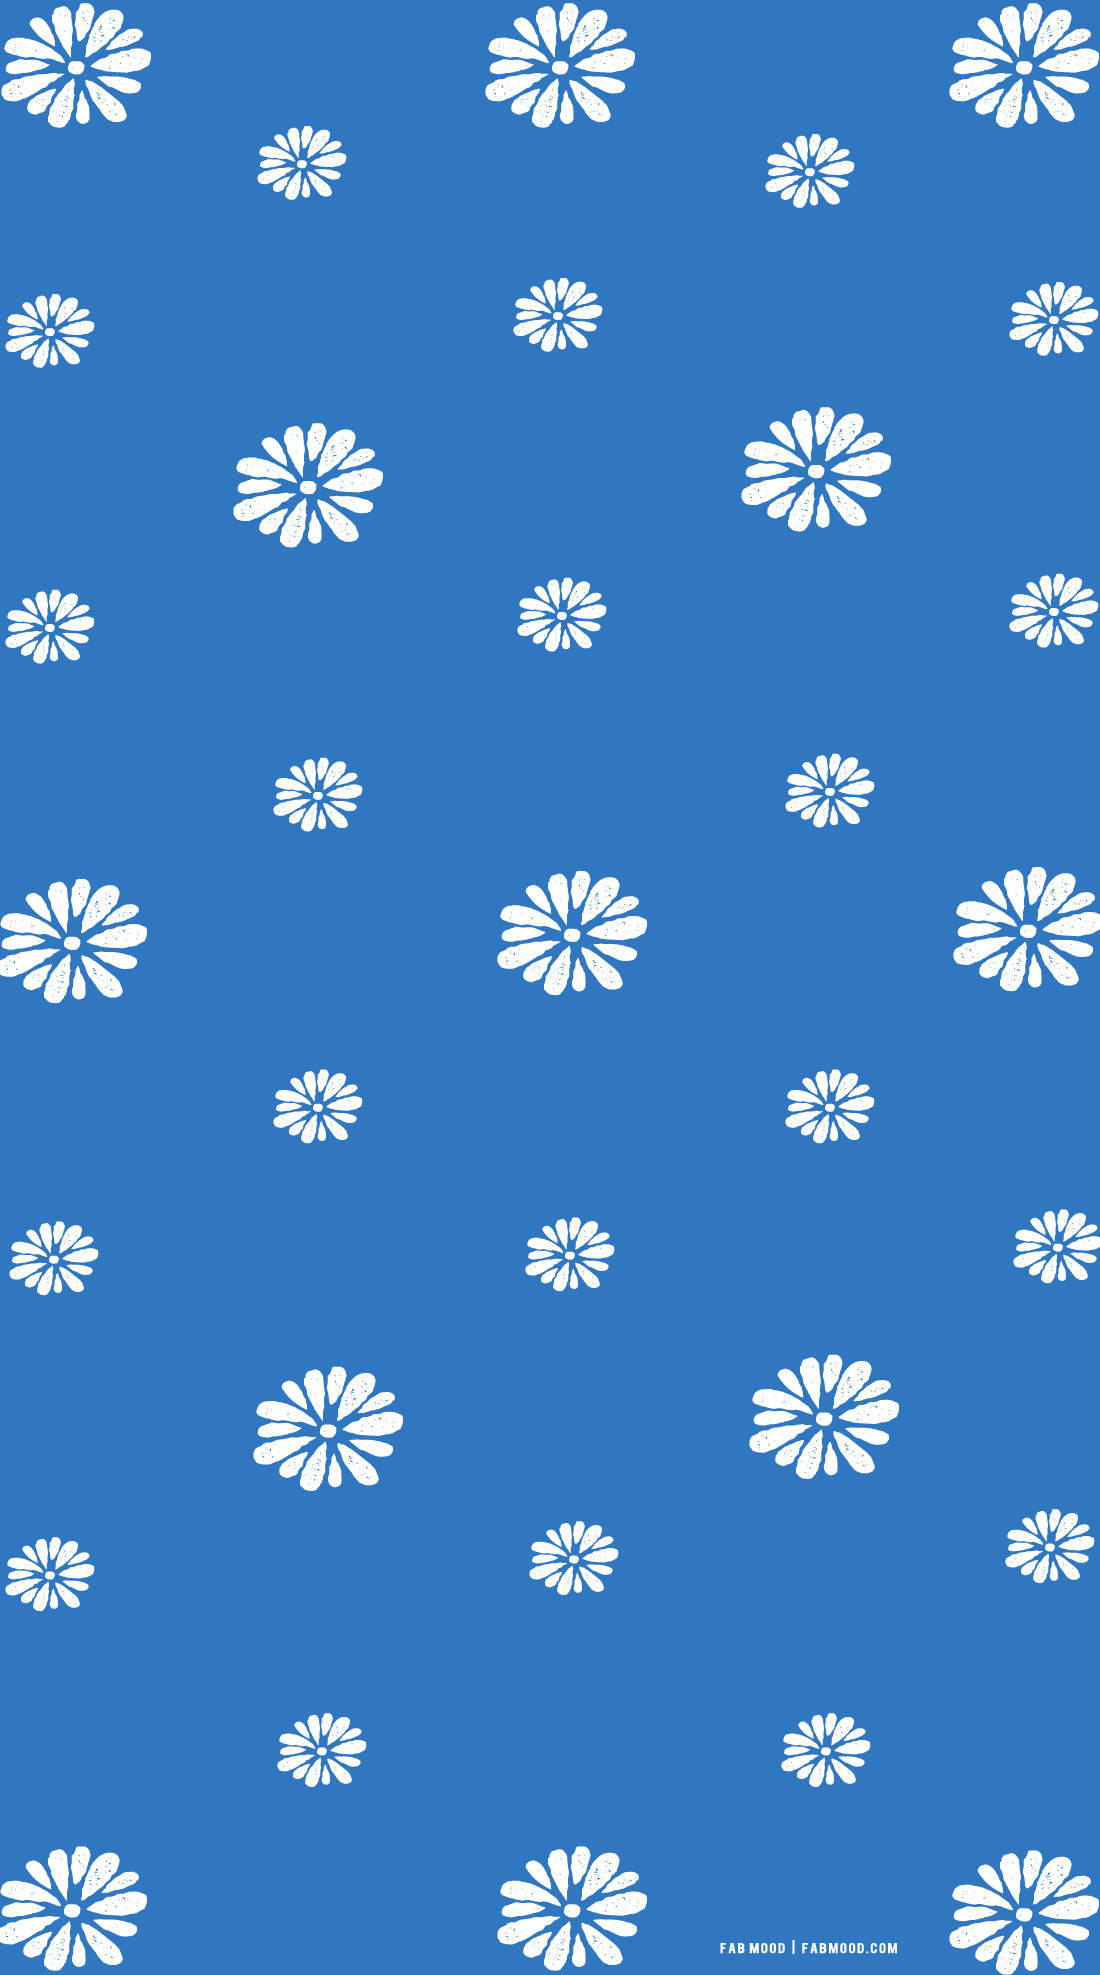 15 Azure Blue Wallpapers For Phone : Daisy Illustration Blue Blackground 1  - Fab Mood | Wedding Colours, Wedding Themes, Wedding colour palettes